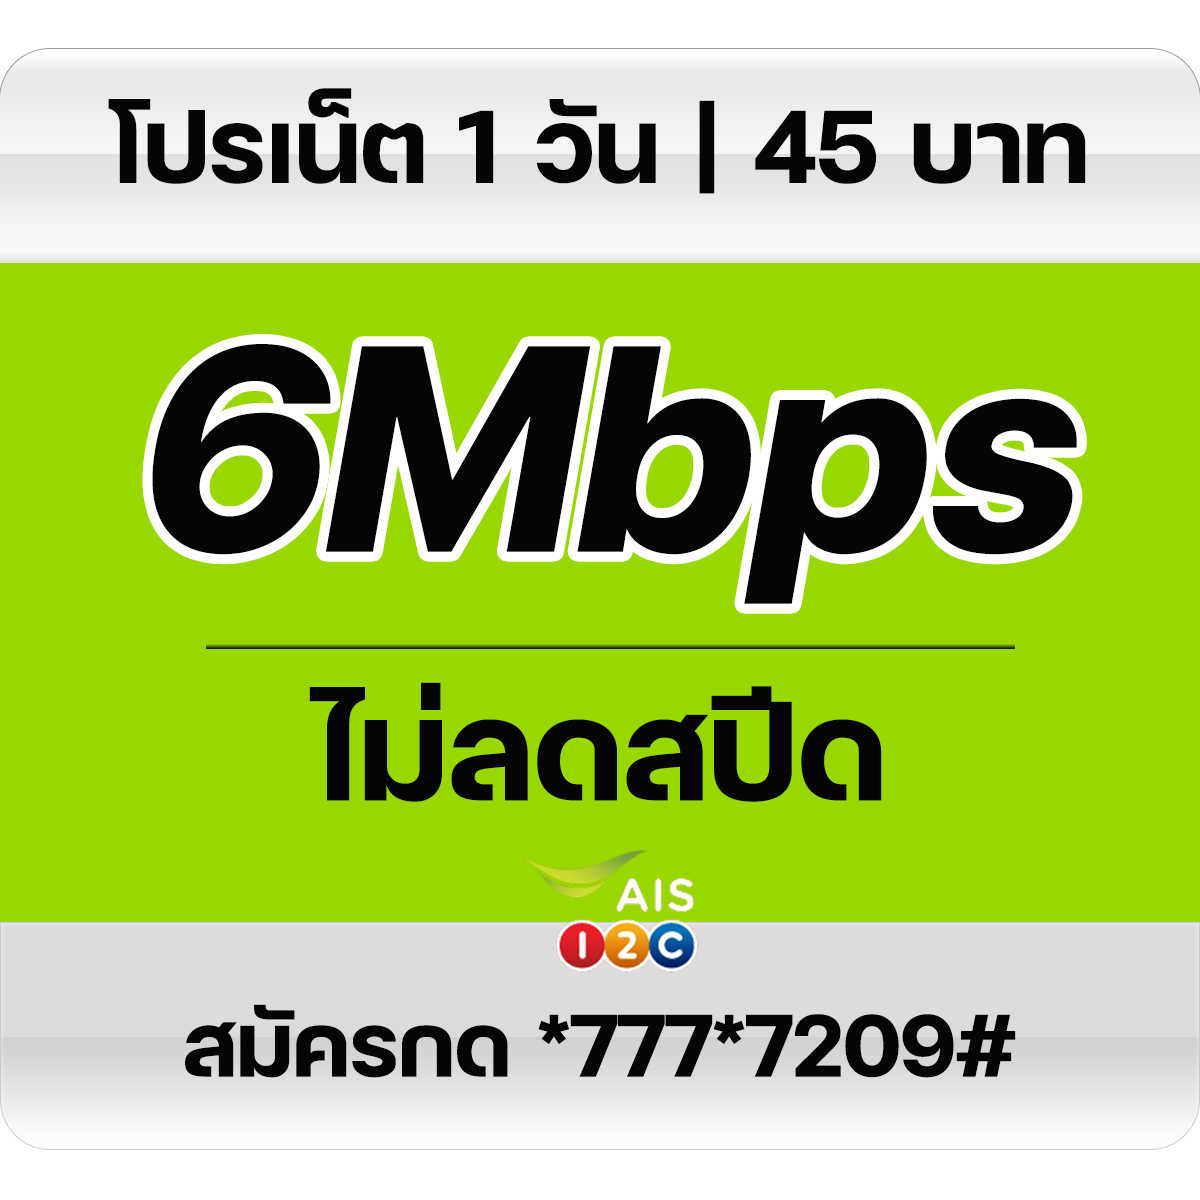 ais pronet 12call 6mbps 1day